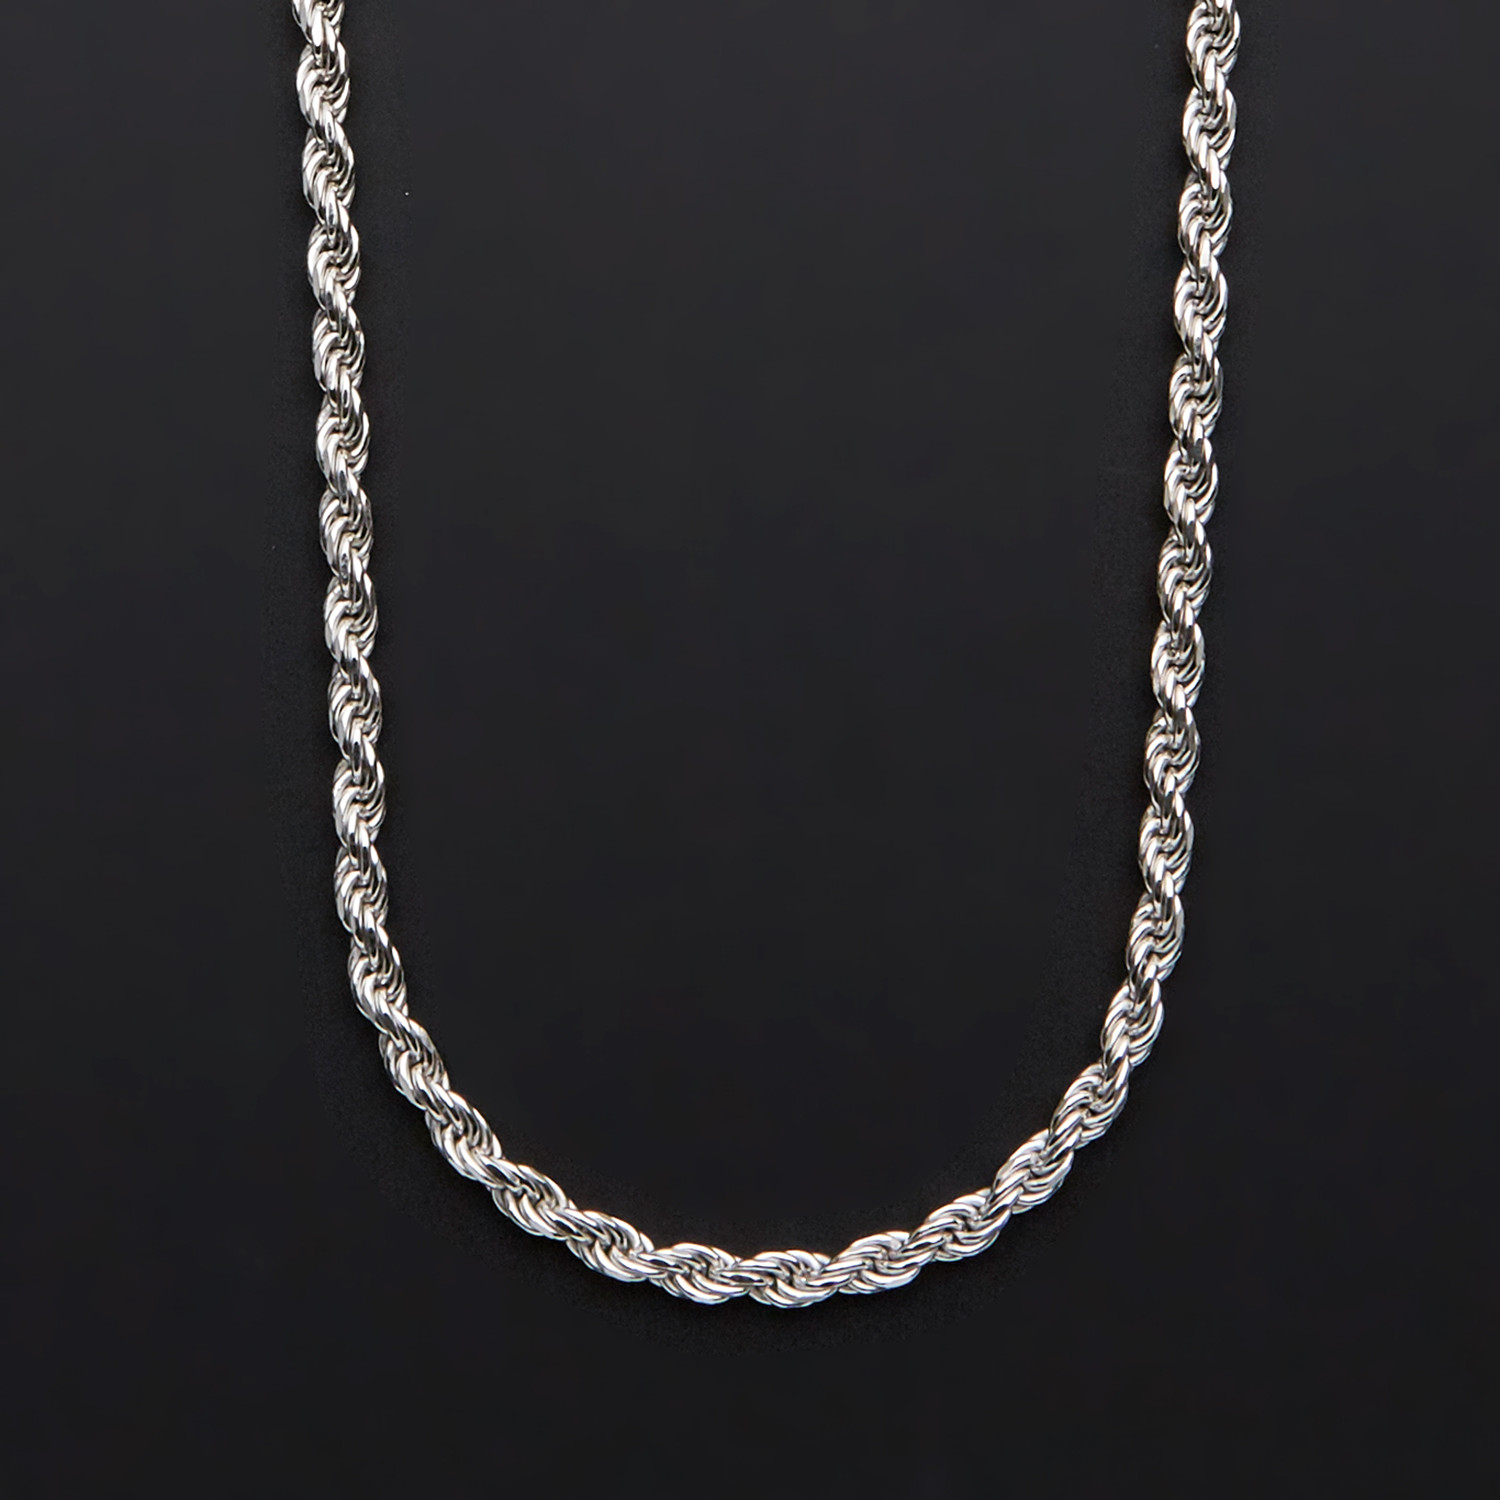 Solid Sterling Silver Rope Chain Necklace // 4.5mm (22") - Best Silver